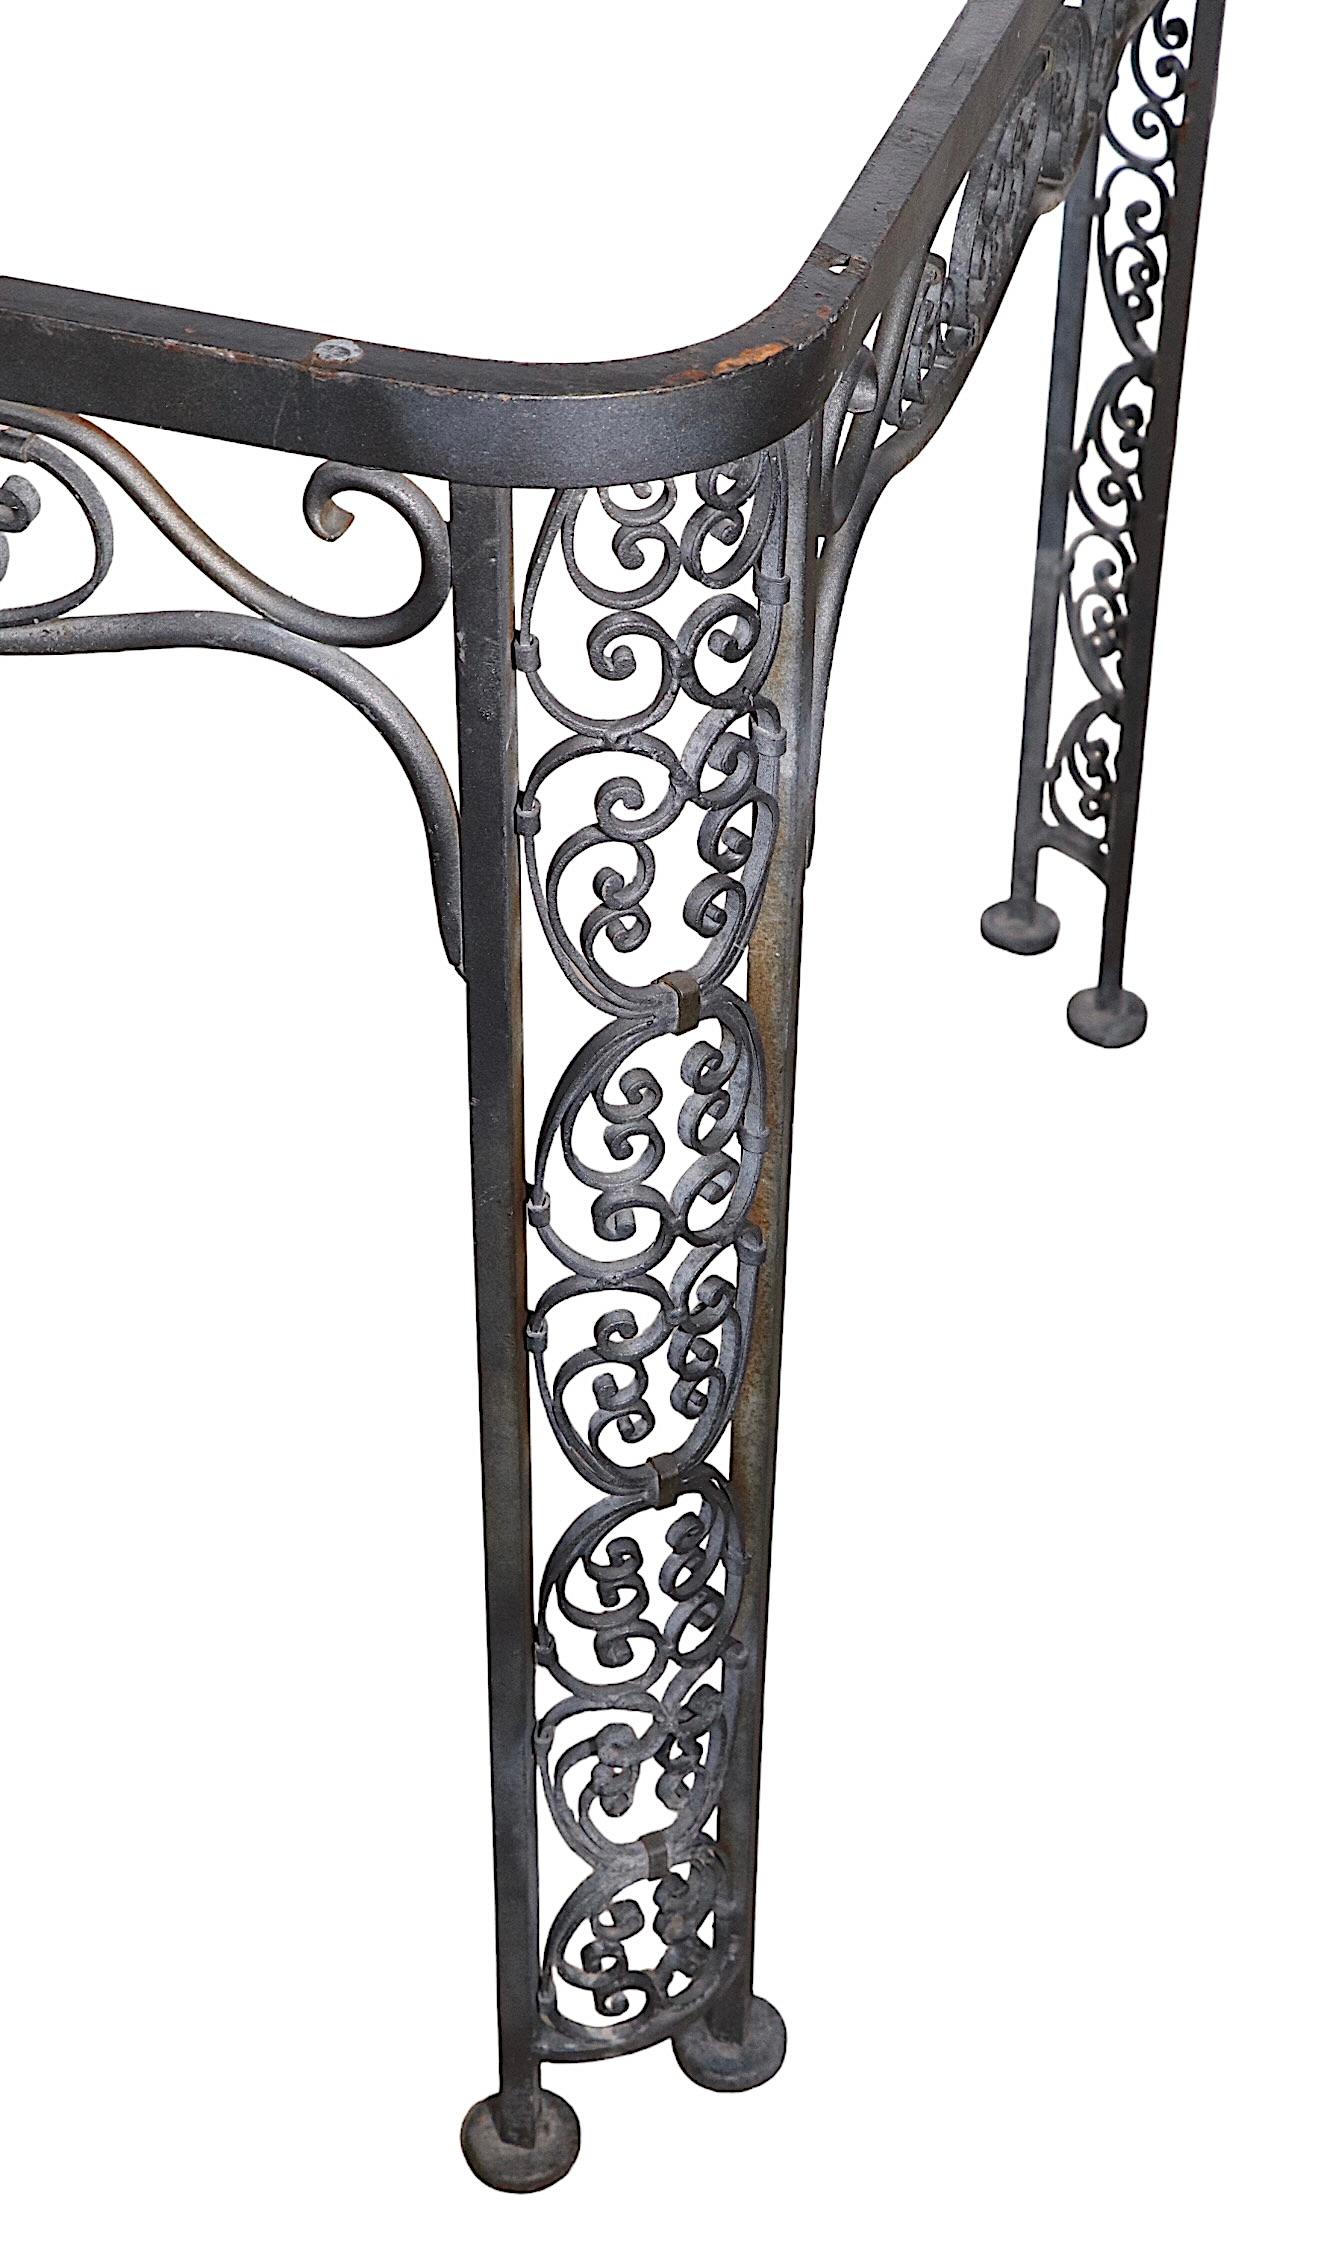 20th Century Ornate Wrought Iron Garden Patio Poolside Dining Table by Lee Woodard, c 1940's For Sale